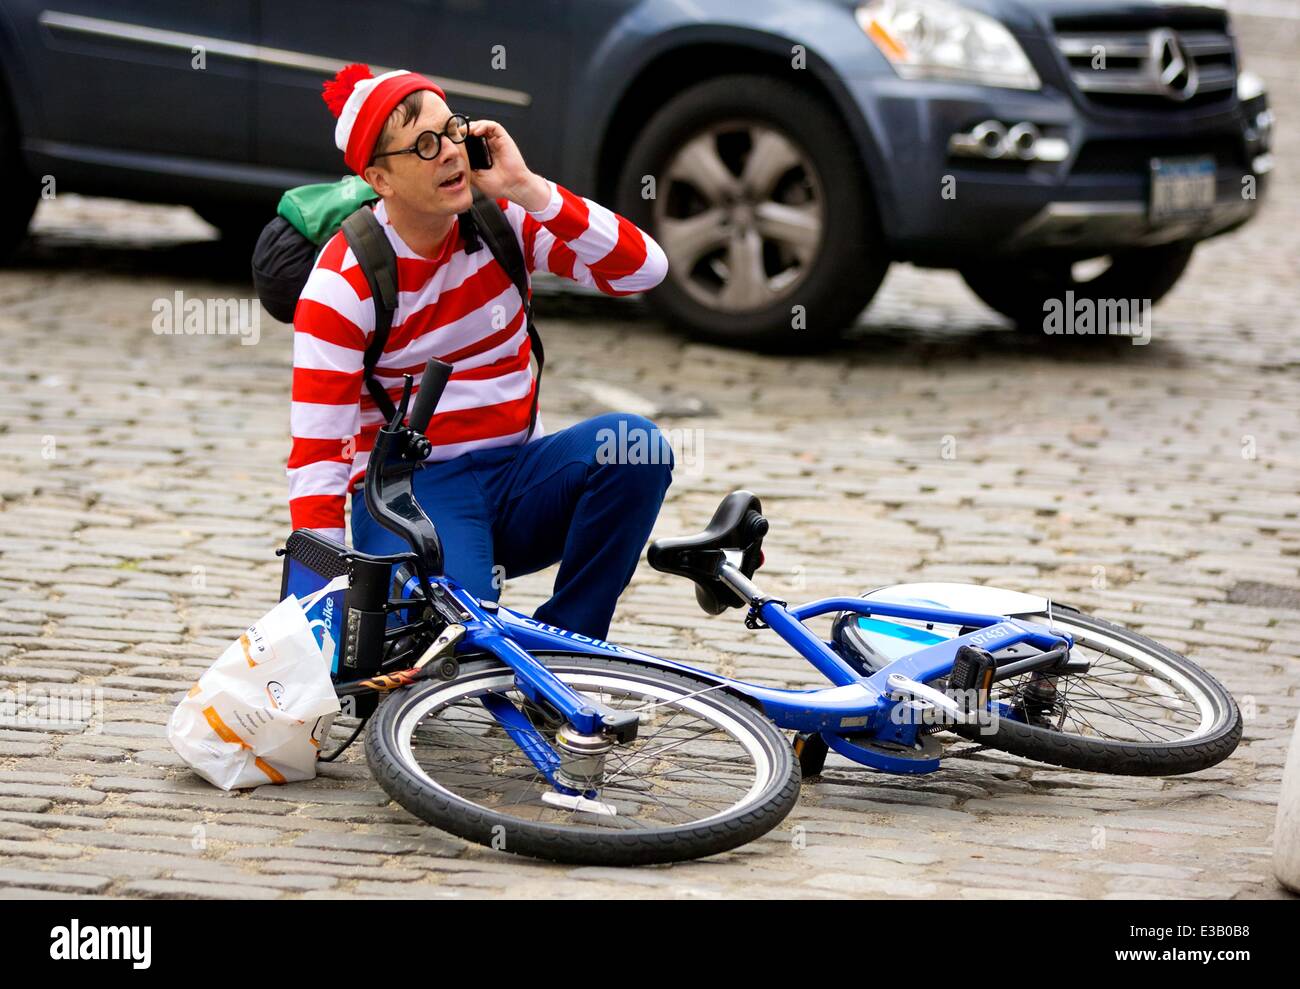 A man dressed as the character Waldo from the children's book series, 'Where's Waldo?' is spotted riding a Citi Bike in the Meatpacking District. With his hands full, Waldo eventually falls off his bicycle to the ground  Featuring: Waldo,Wally Where: New Stock Photo